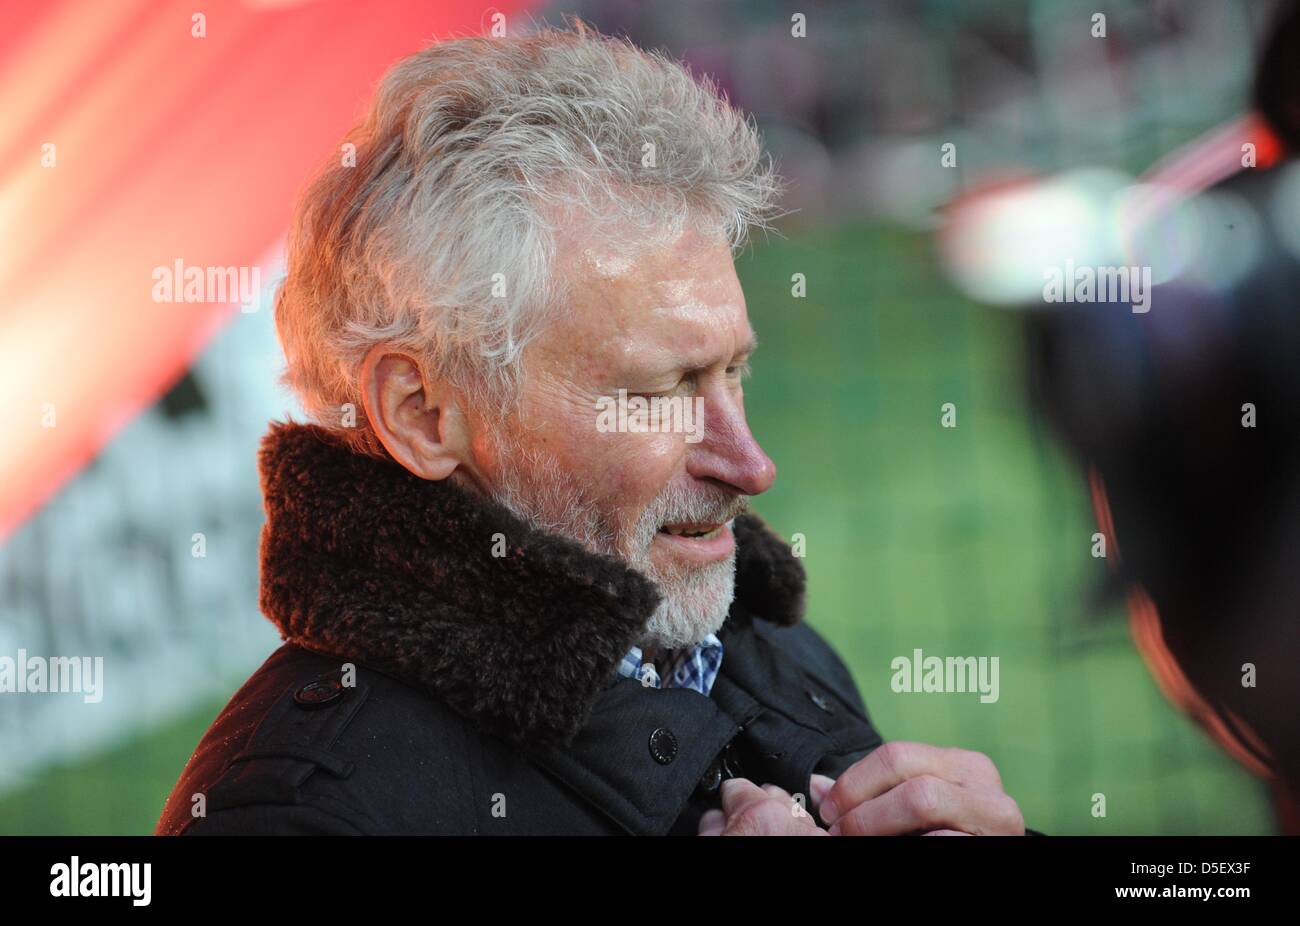 Munich, Germany. 30th March 2013. Former soccer player Paul Breitner comes to the match FC Bayern Munich - Hamburger SV in the Allianz Arena in Munich, Germany, 30 March 2013. Bayern Munich wins 9:2. Photo: Andreas Gebert/dpa/Alamy Live News Stock Photo